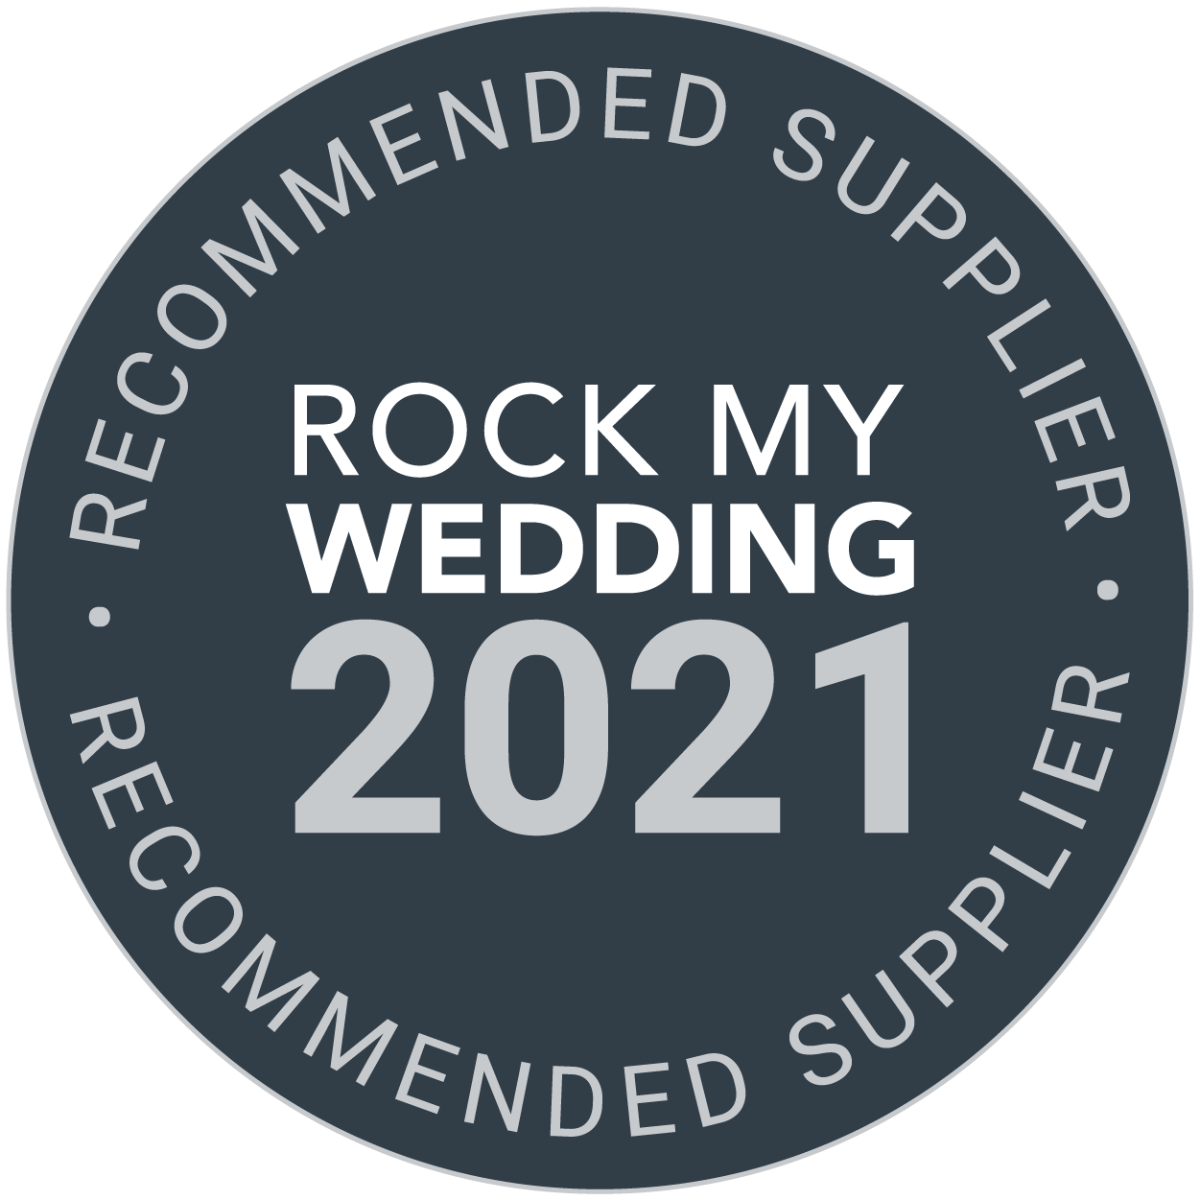 Recommended Supplier & Featured on Rock My Wedding 